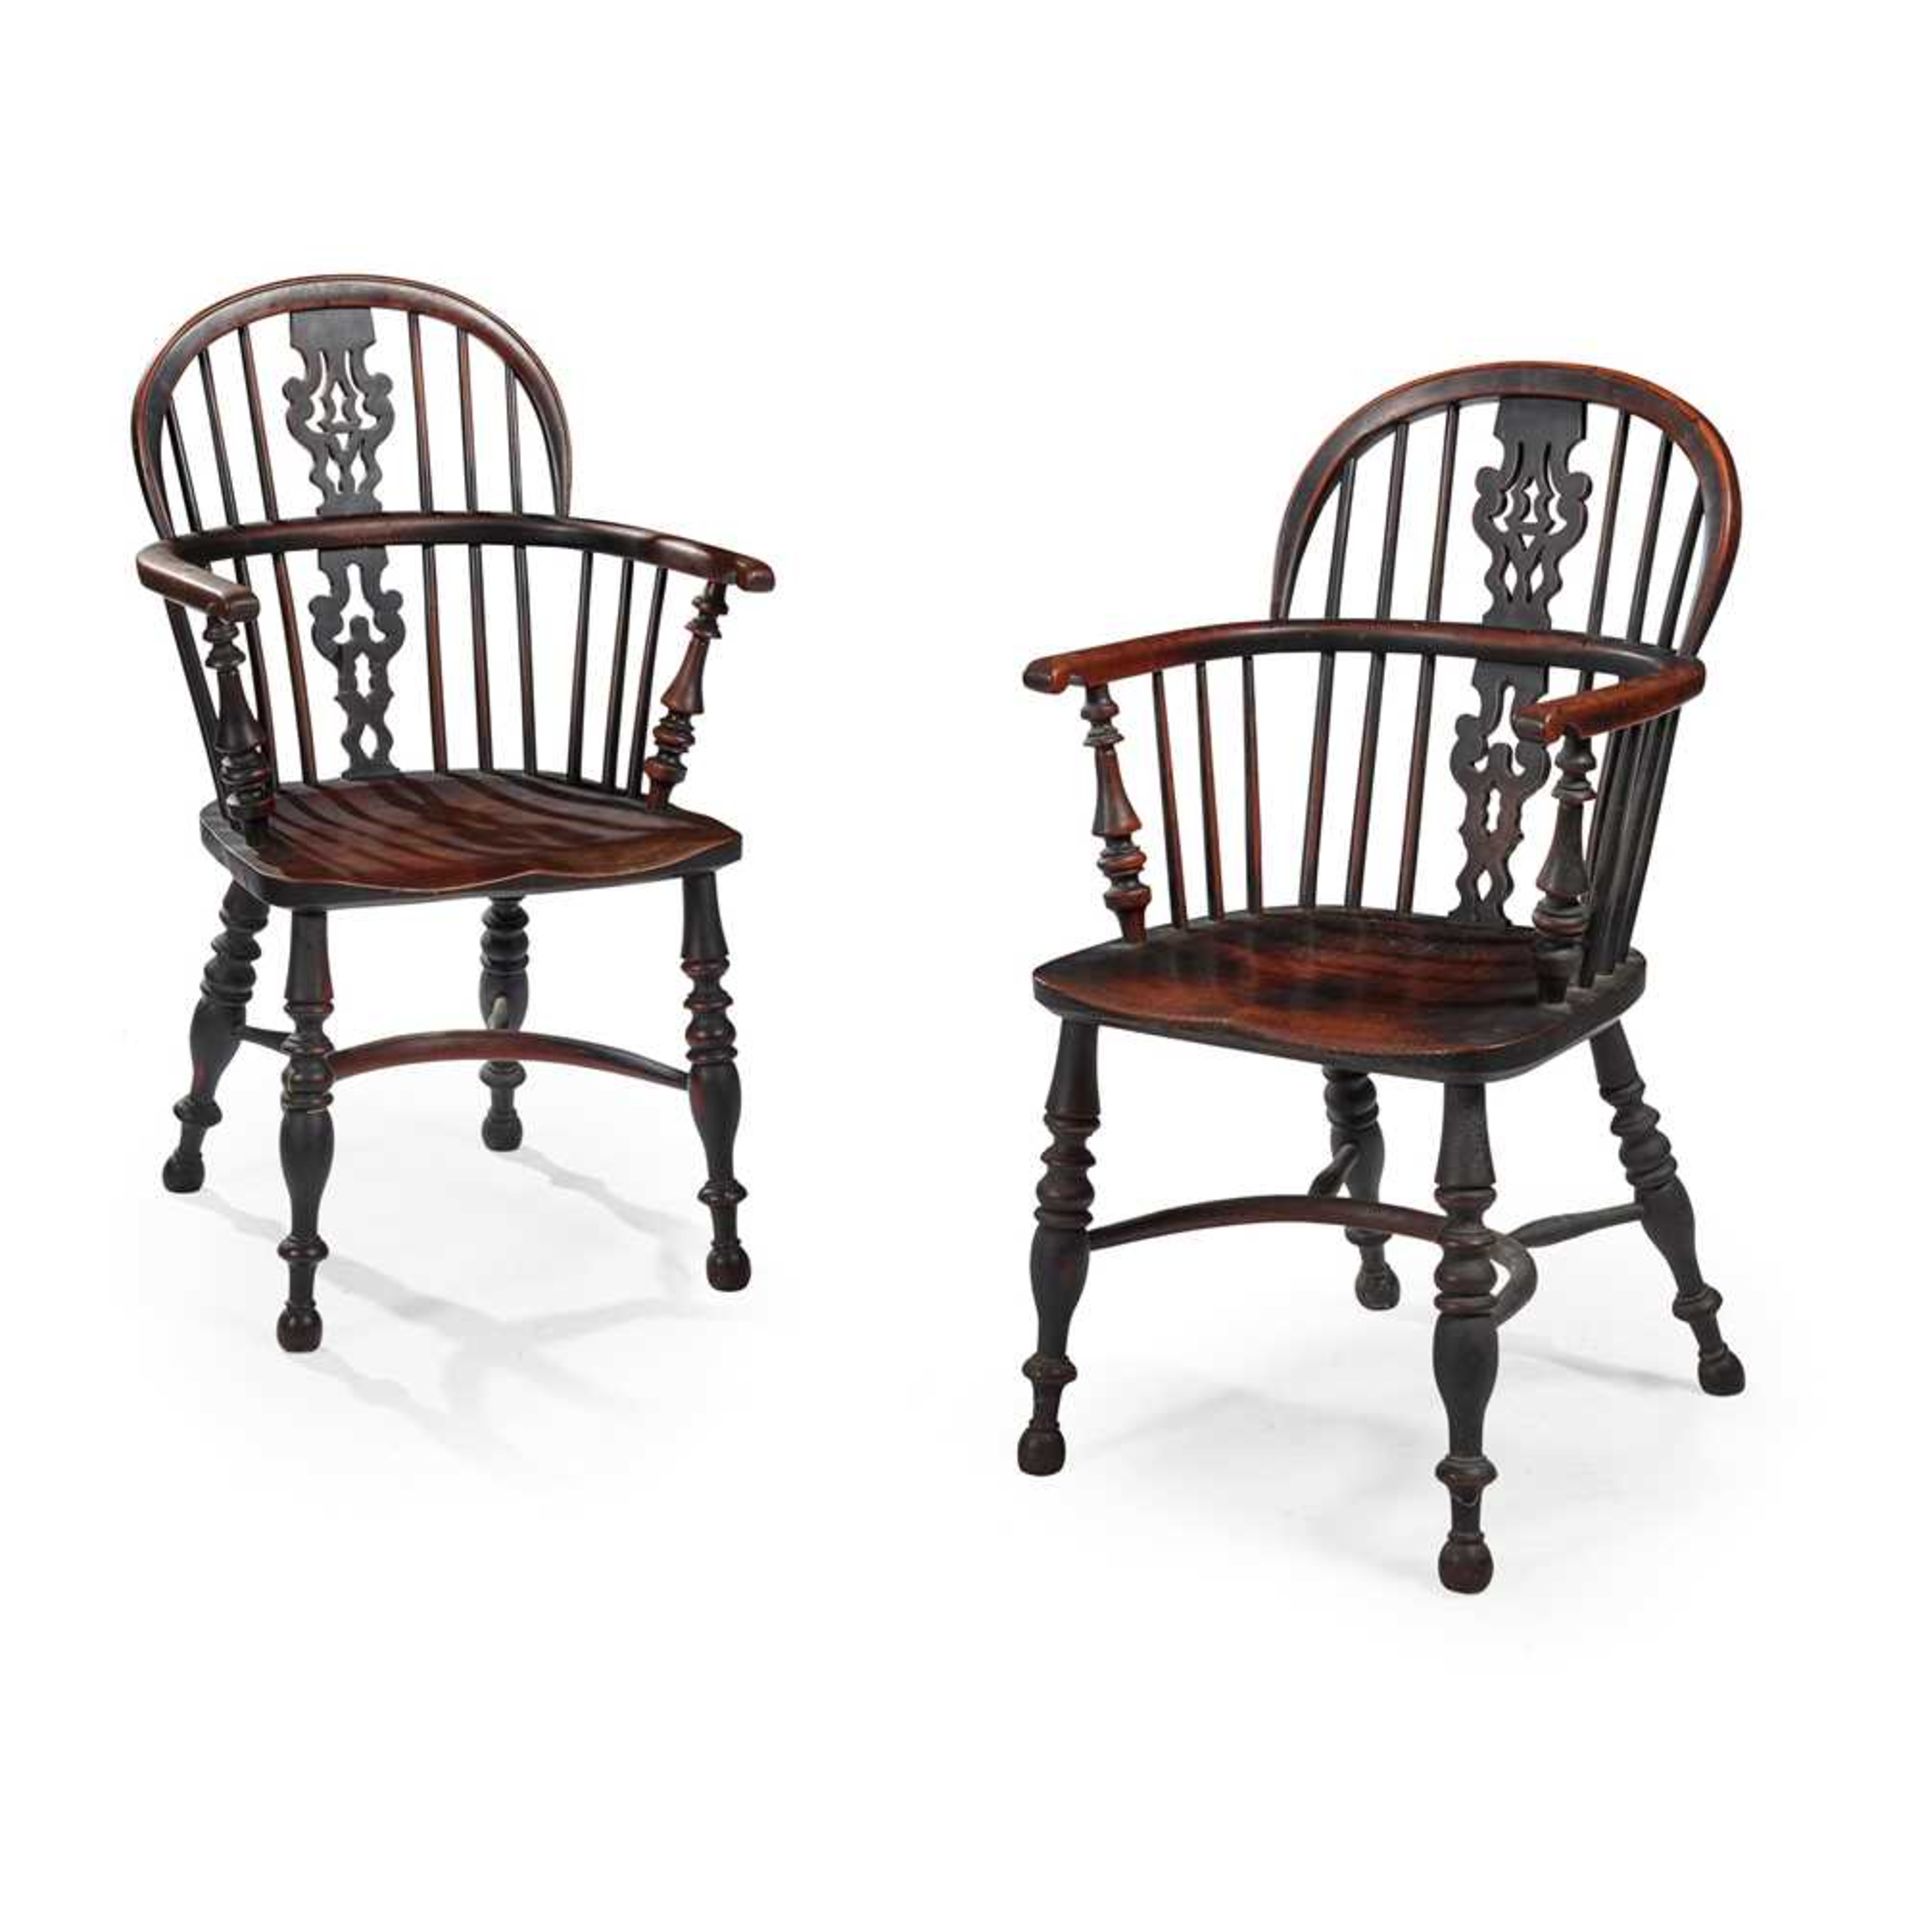 PAIR OF YEW AND ELM LOW WINDSOR ARMCHAIRS LATE 18TH/EARLY 19TH CENTURY